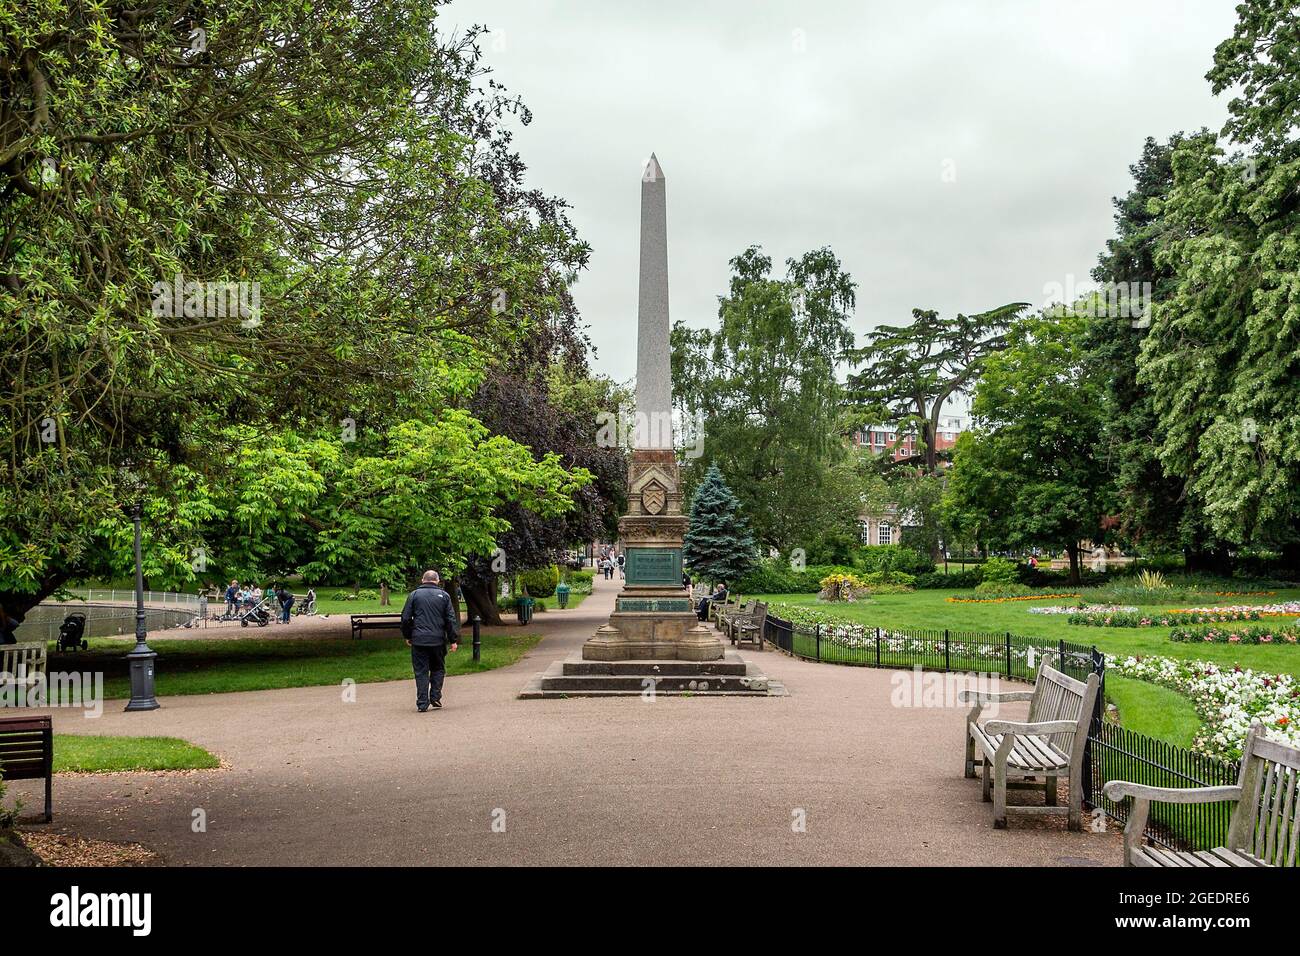 People enjoy a stroll through Jephson Gardens, Royal Leamington Spa. Willes Obelisk, a granite obelisk with a Neo-Gothic pedestal stands centre. Stock Photo